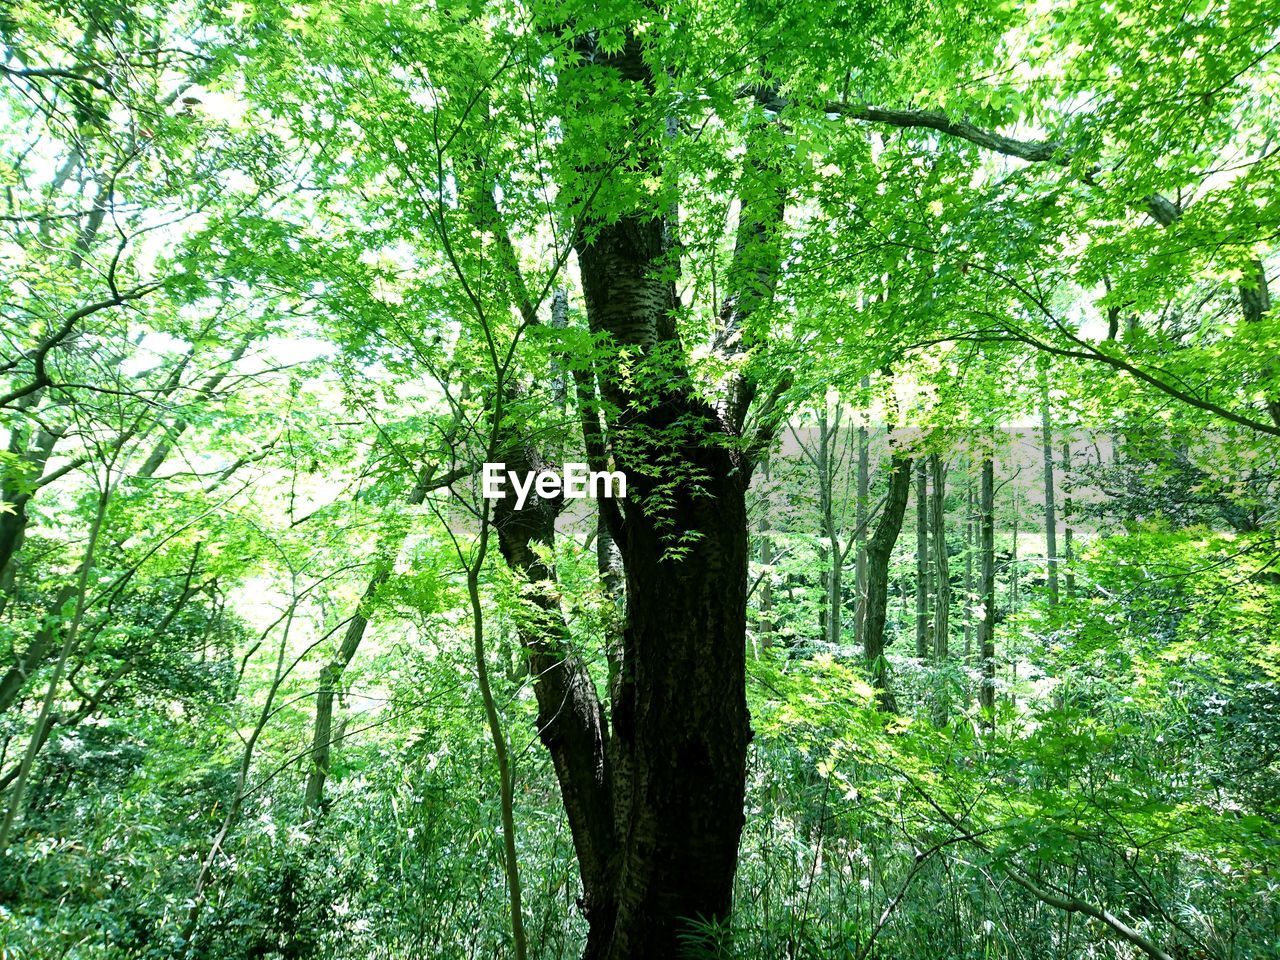 VIEW OF TREE IN FOREST